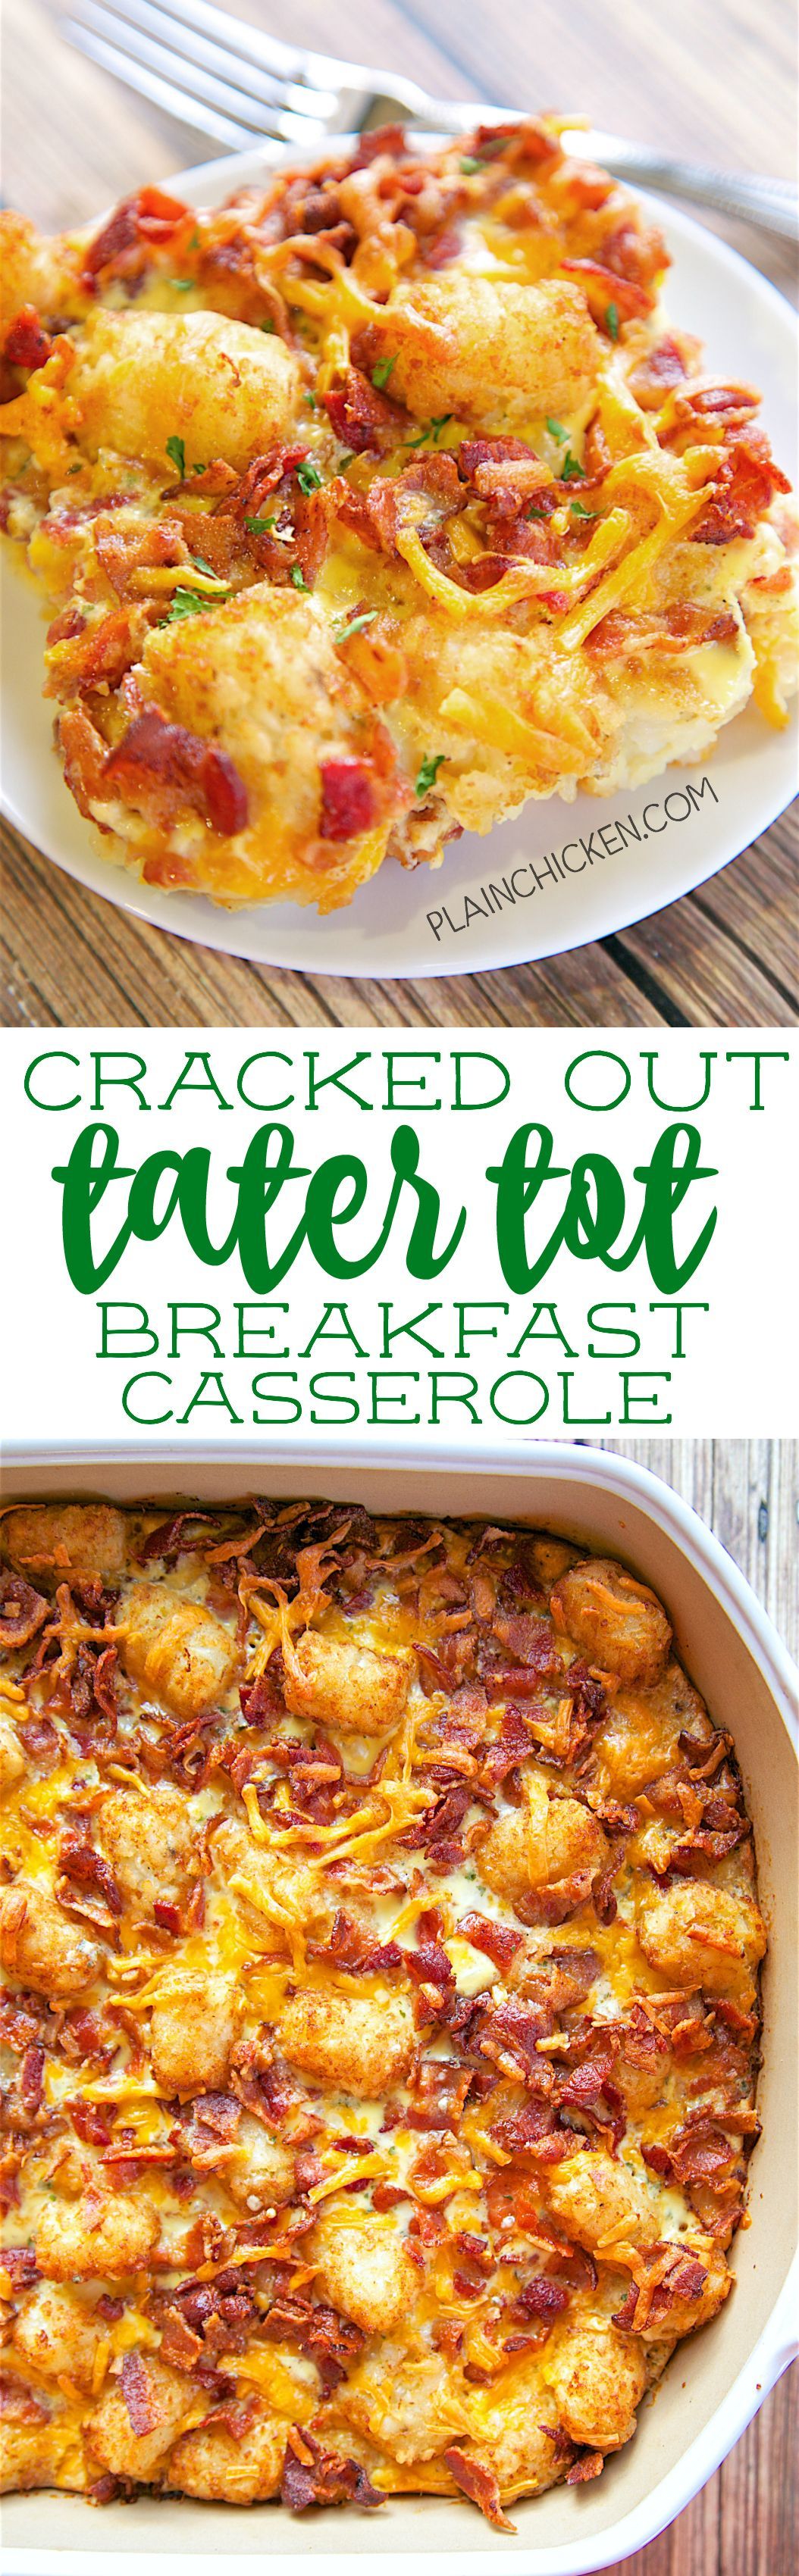 Cracked Out Tater Tot Breakfast Casserole – great make ahead recipe! Only 6 ingred